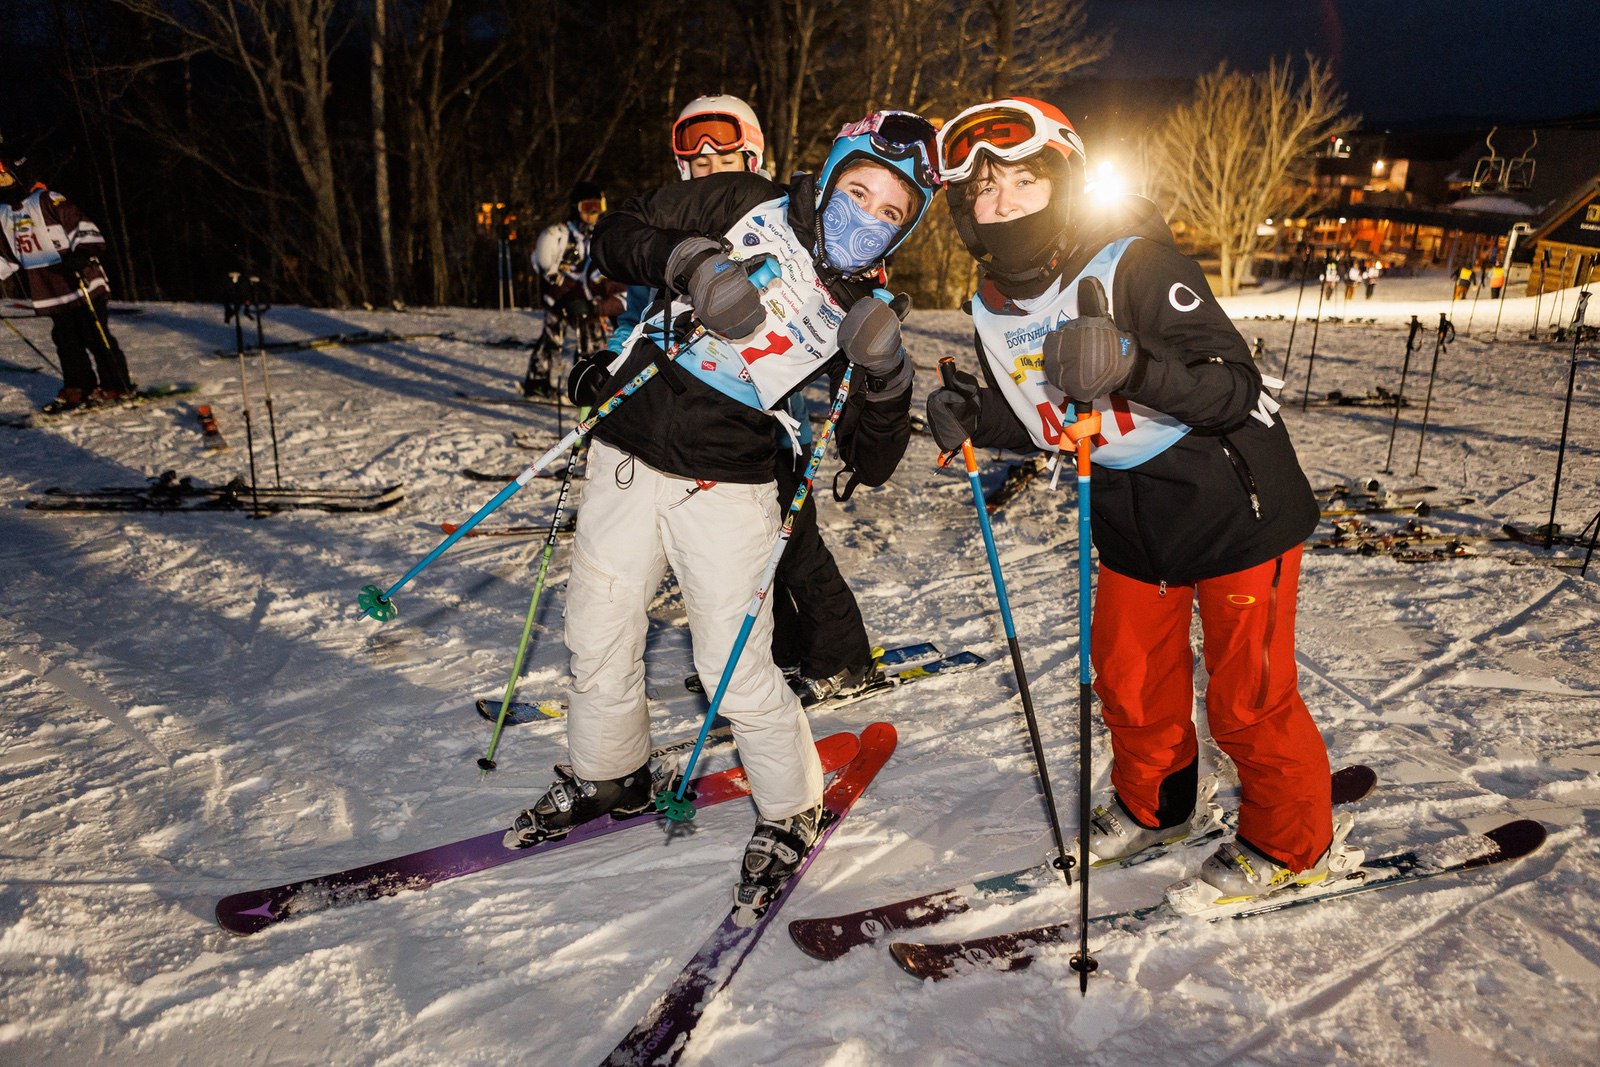 Registration open for WinterKids’ 11th annual Downhill 24 at Sugarloaf